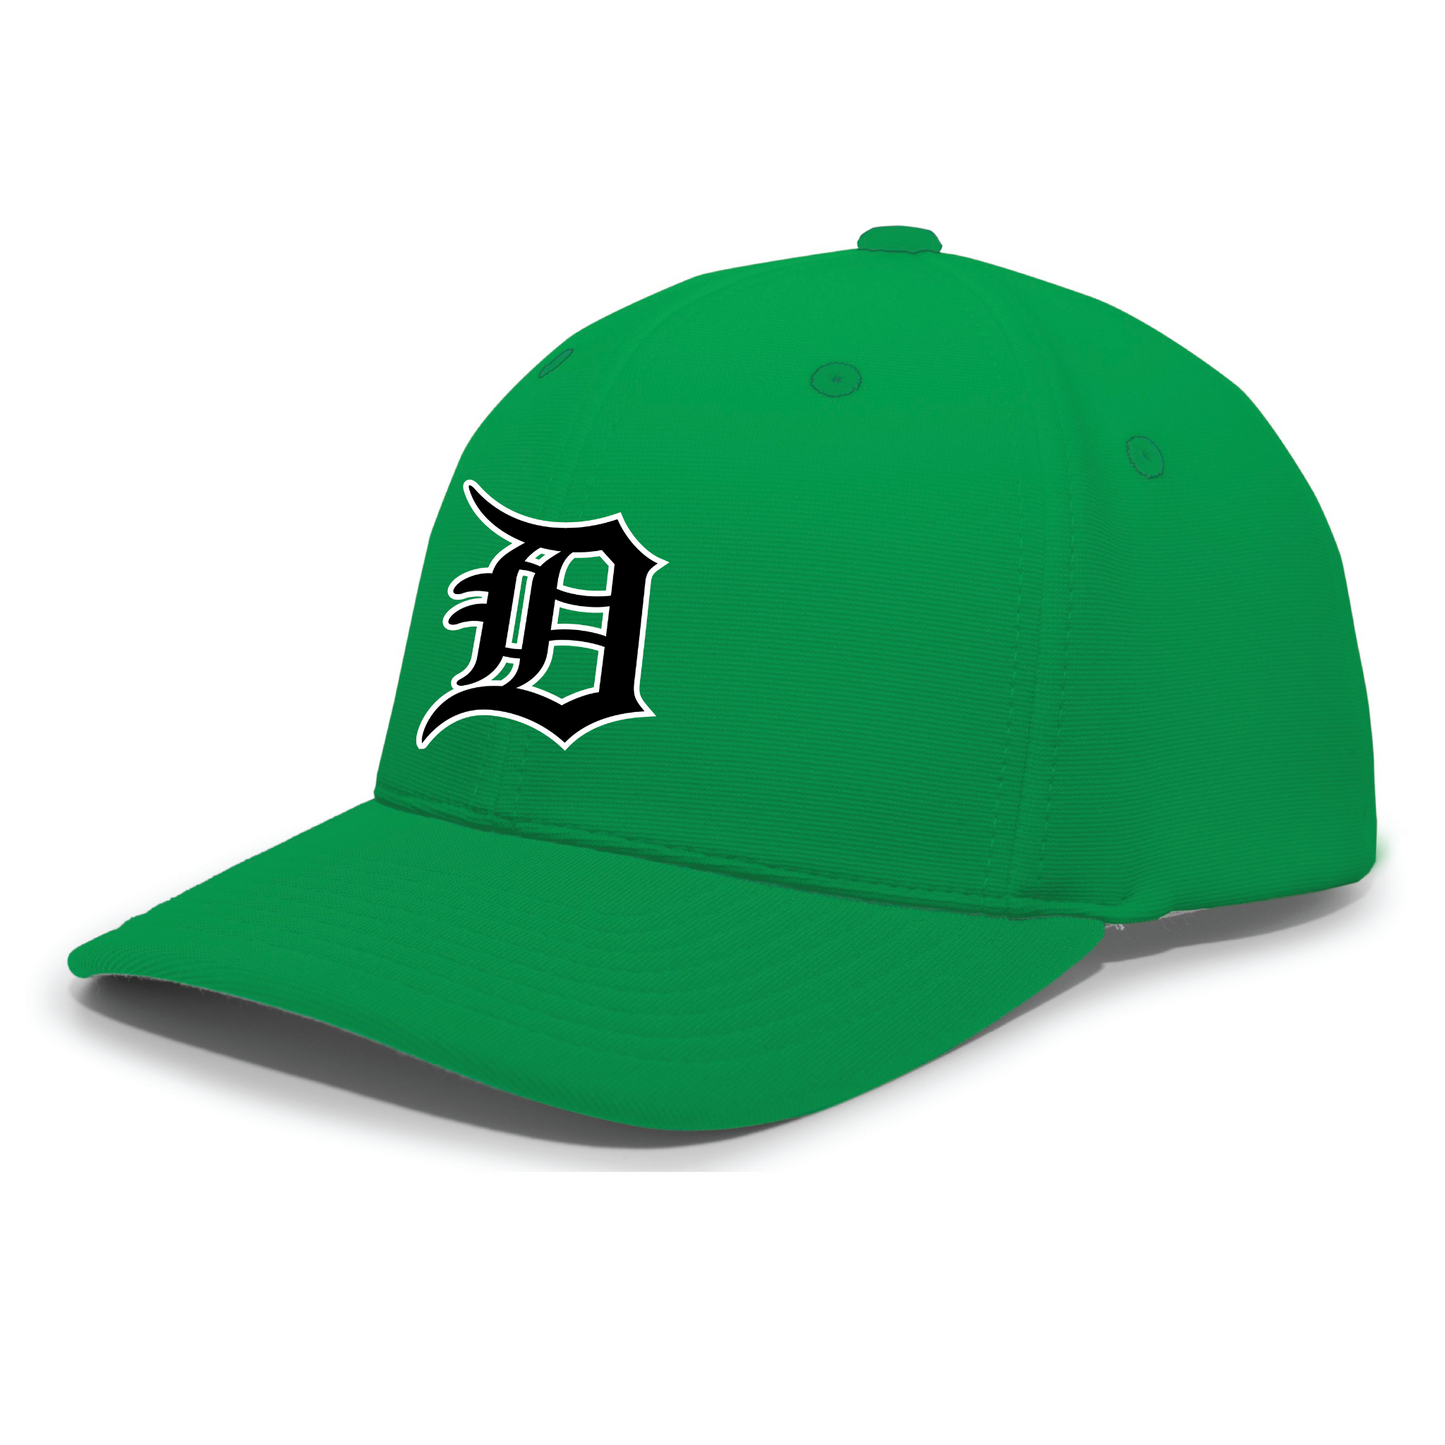 Dwight Football Fitted Hat - Green